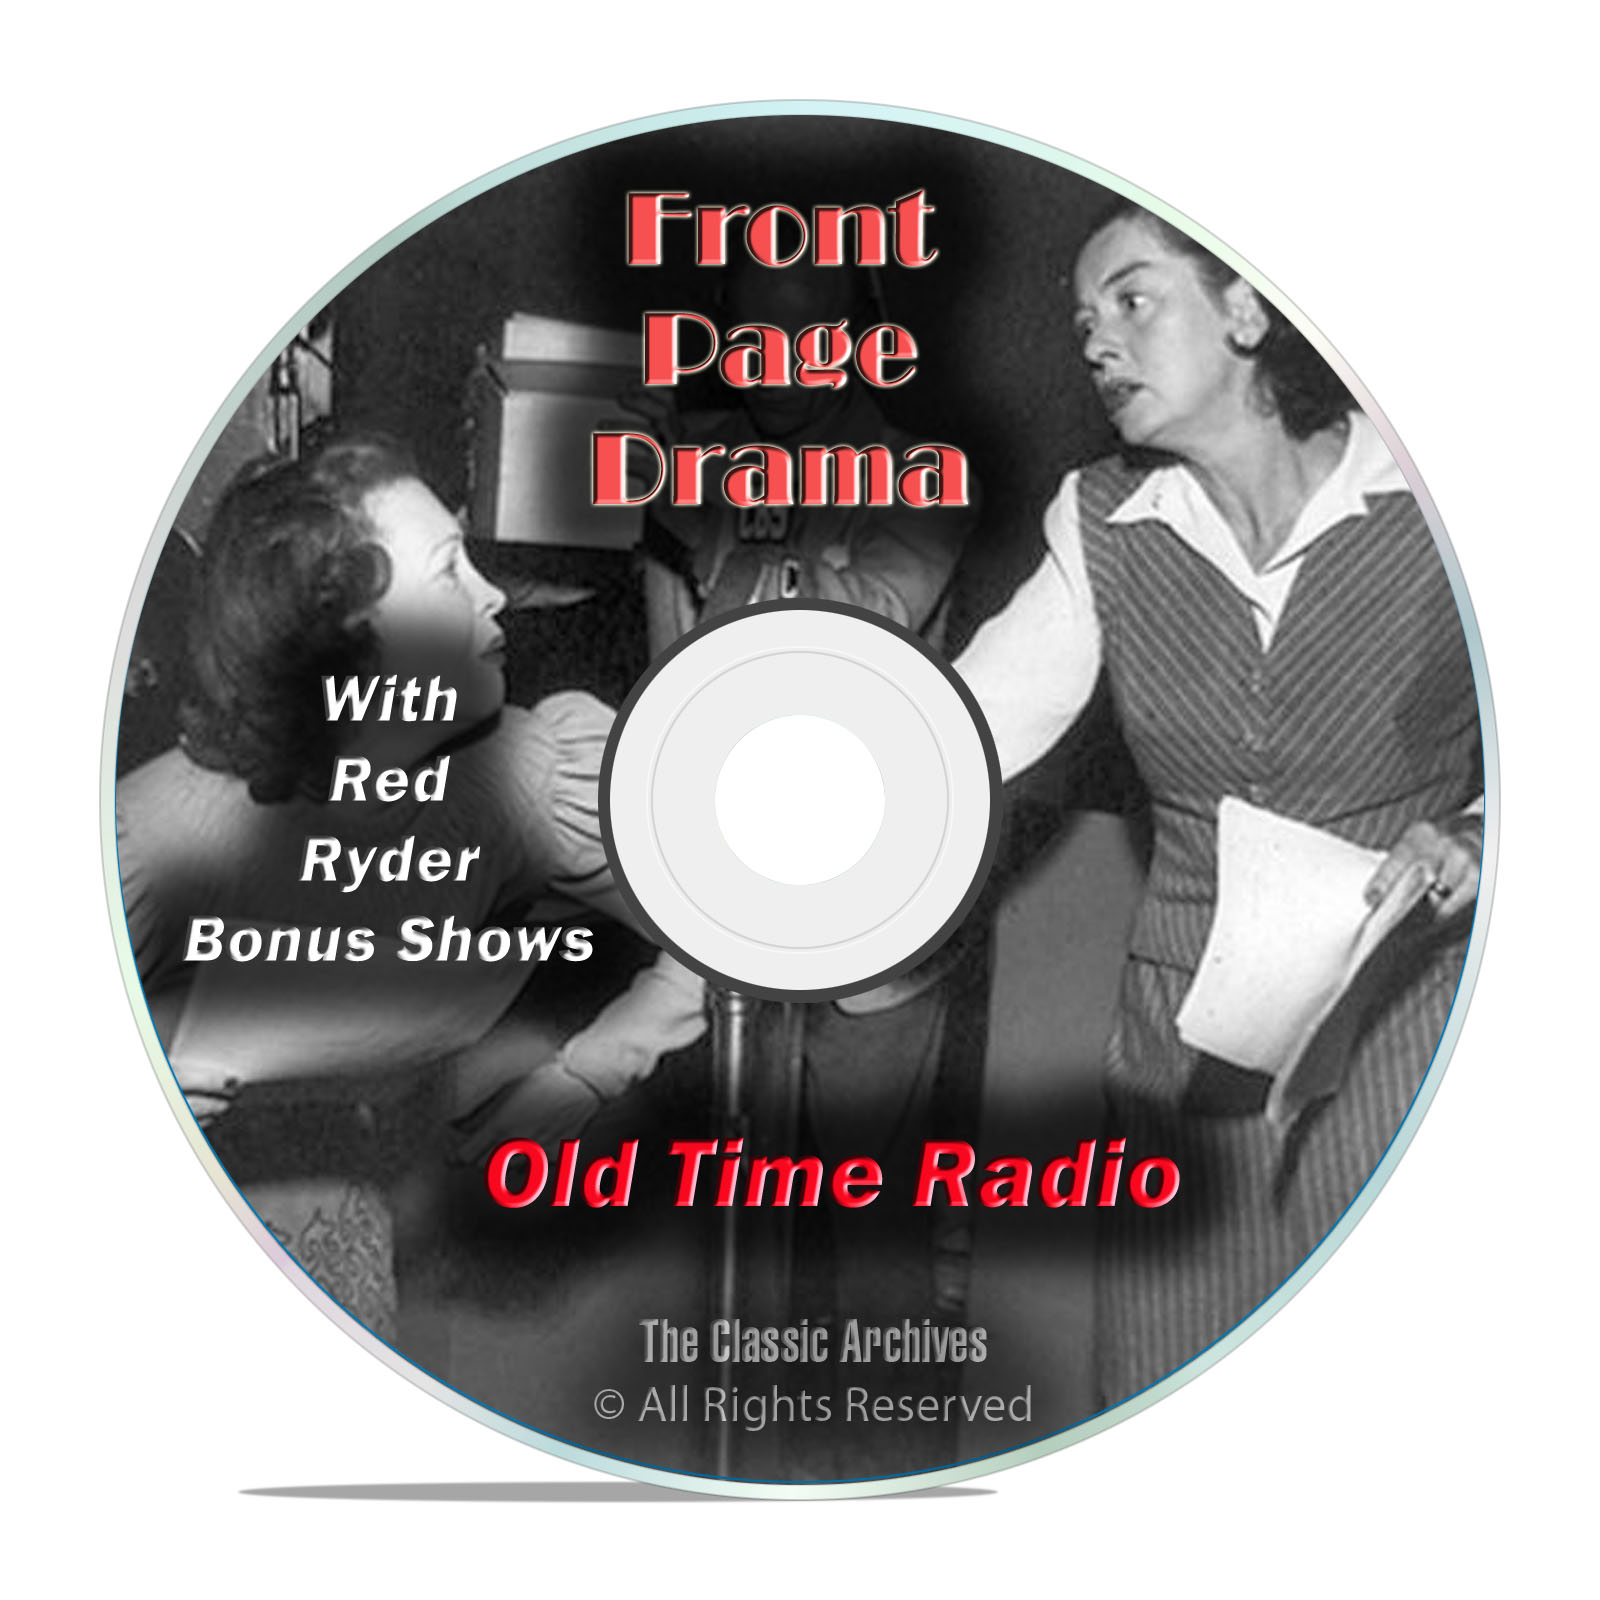 Front Page Drama, 867 Classic Old Time Radio Drama Shows, OTR mp3 DVD